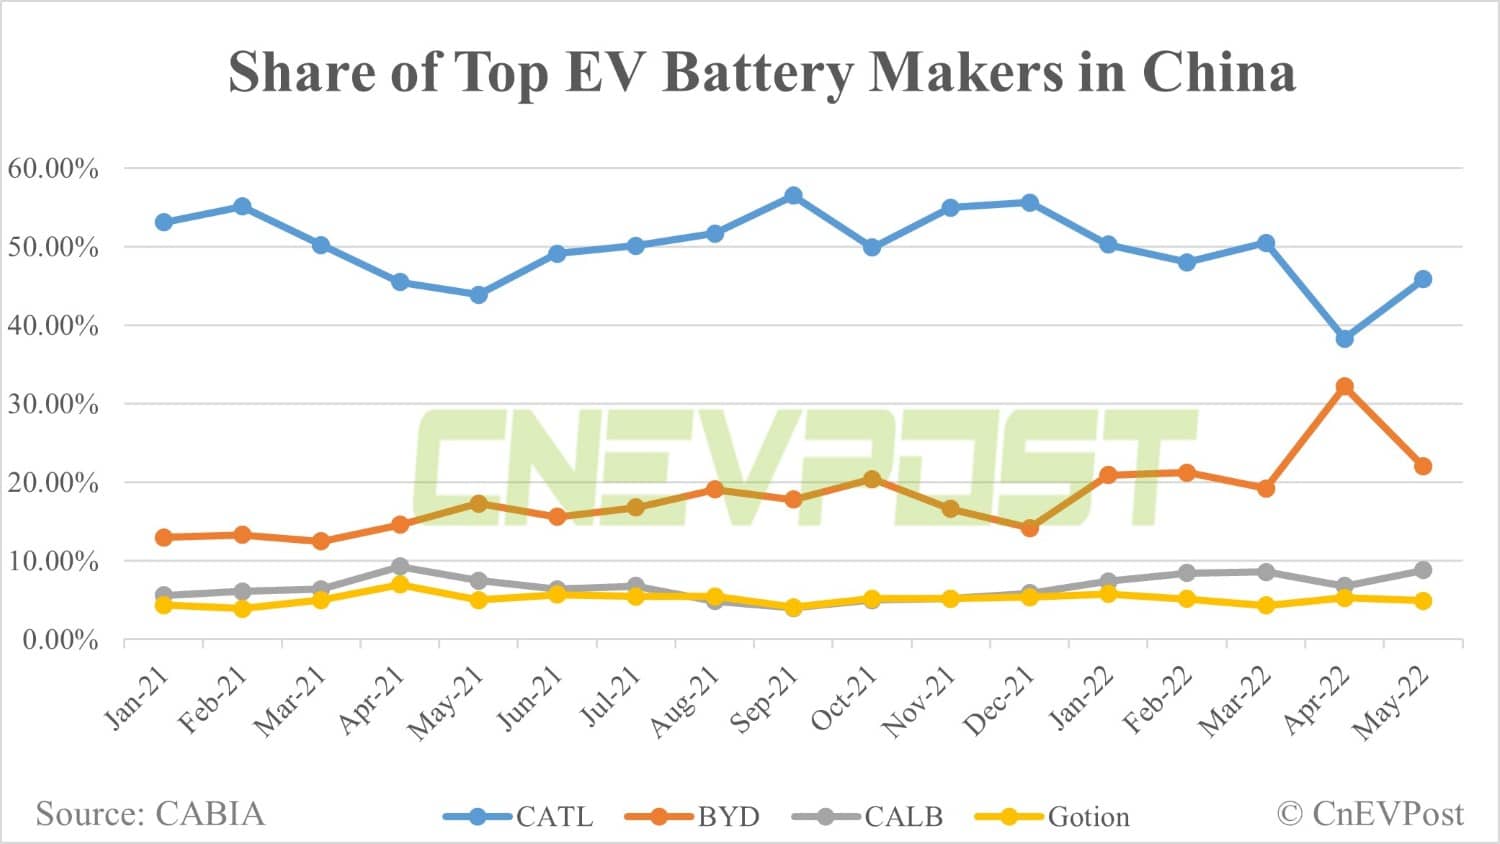 CATL's share in China's power battery market rebounds in May while BYD declines-CnEVPost